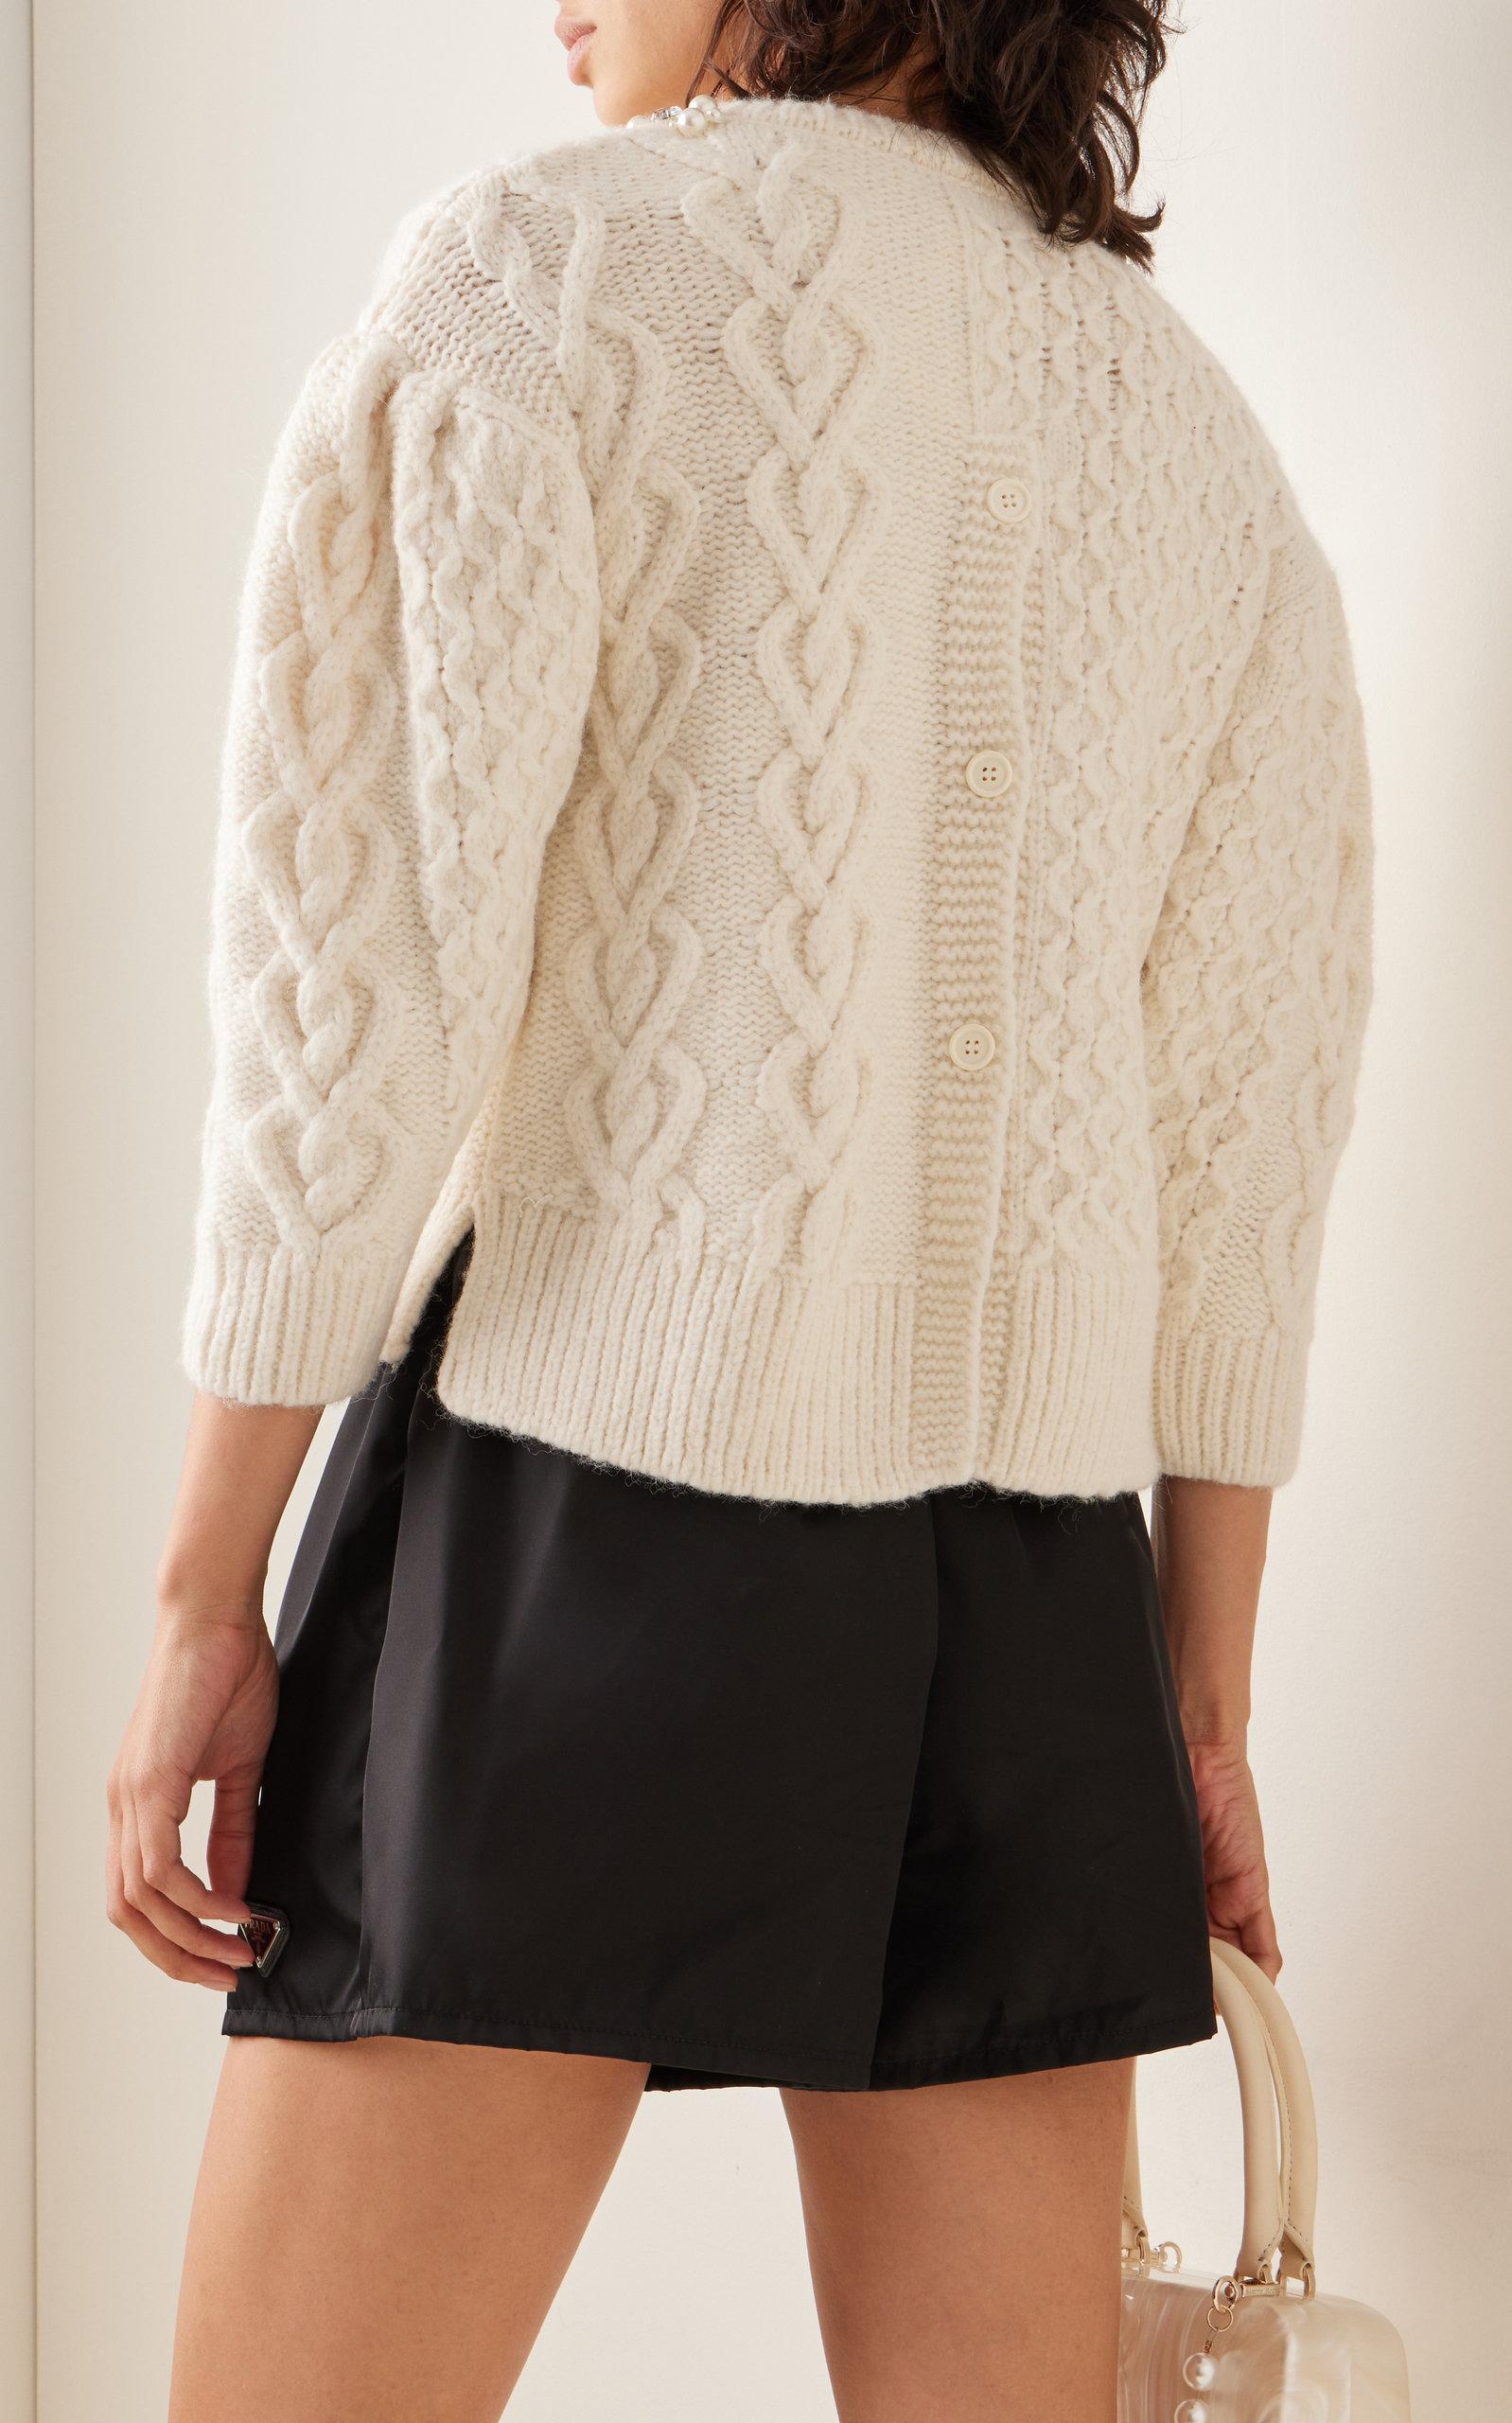 Simone Rocha Ribbon-trimmed Knitted Sweater in White | Lyst